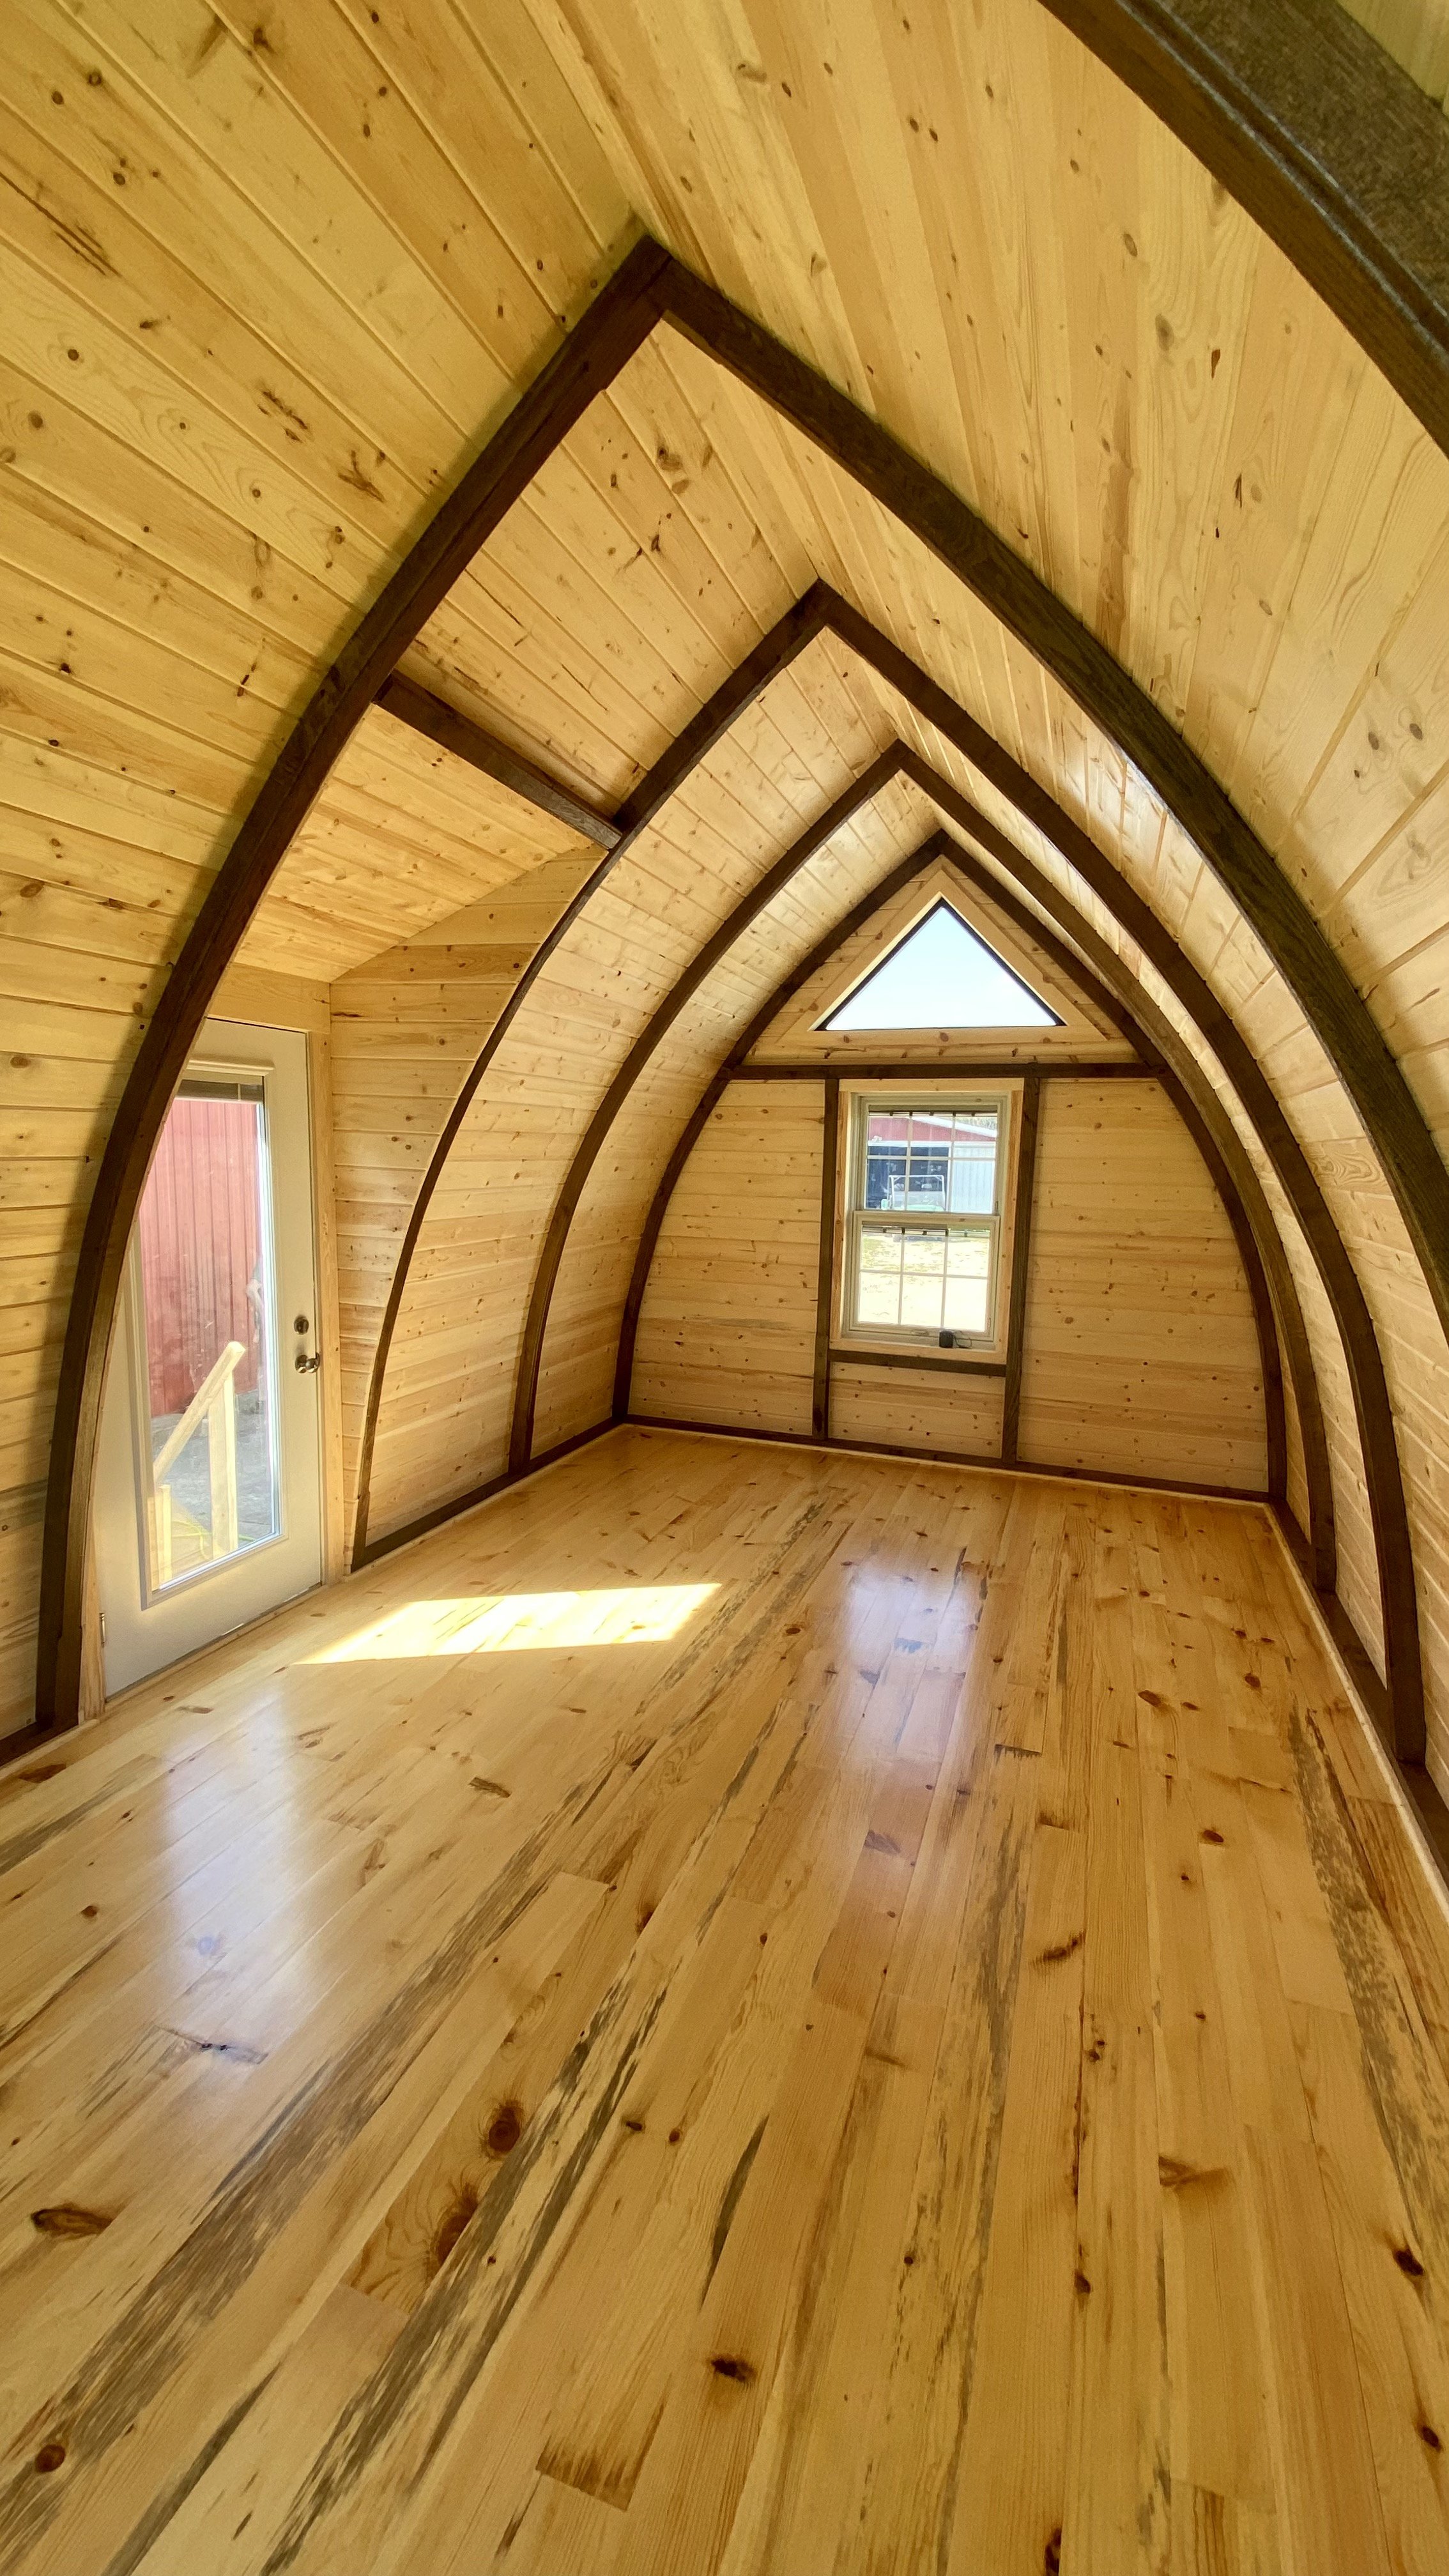 Arched Cabins - Kitchen Fun With My 3 Sons